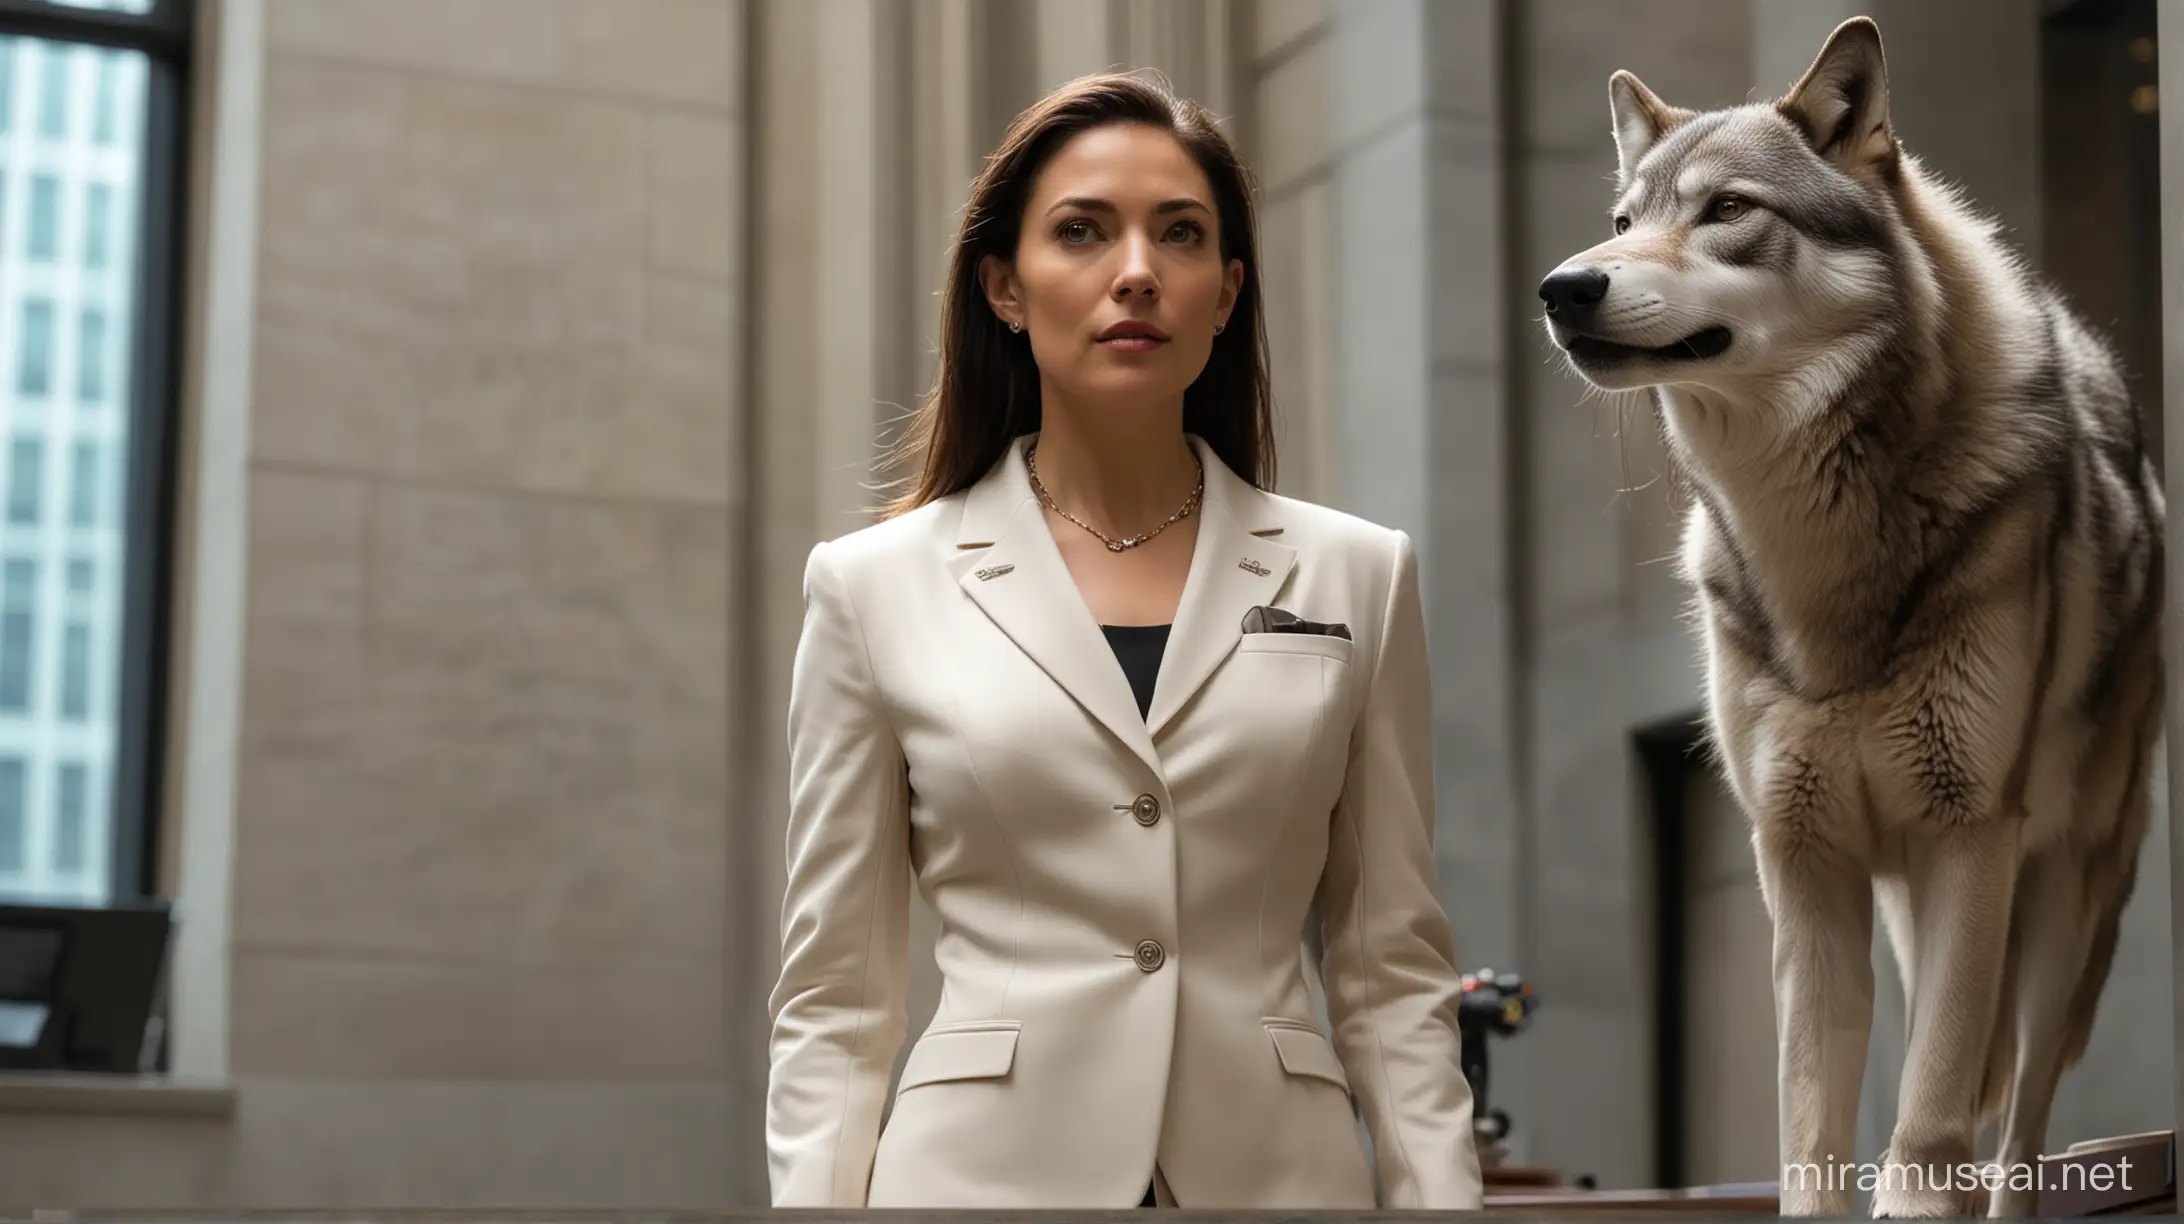 United States: In the boardrooms of Wall Street, a Sigma queen of American heritage commands attention in her sleek power suit, her cybernetic wolf companion surprising executives with its ability to detect deceit and manipulation with a single twitch of its finely tuned ears. Together, they embody confidence and assertiveness, leaving even the most seasoned business moguls feeling uneasy in their presence.